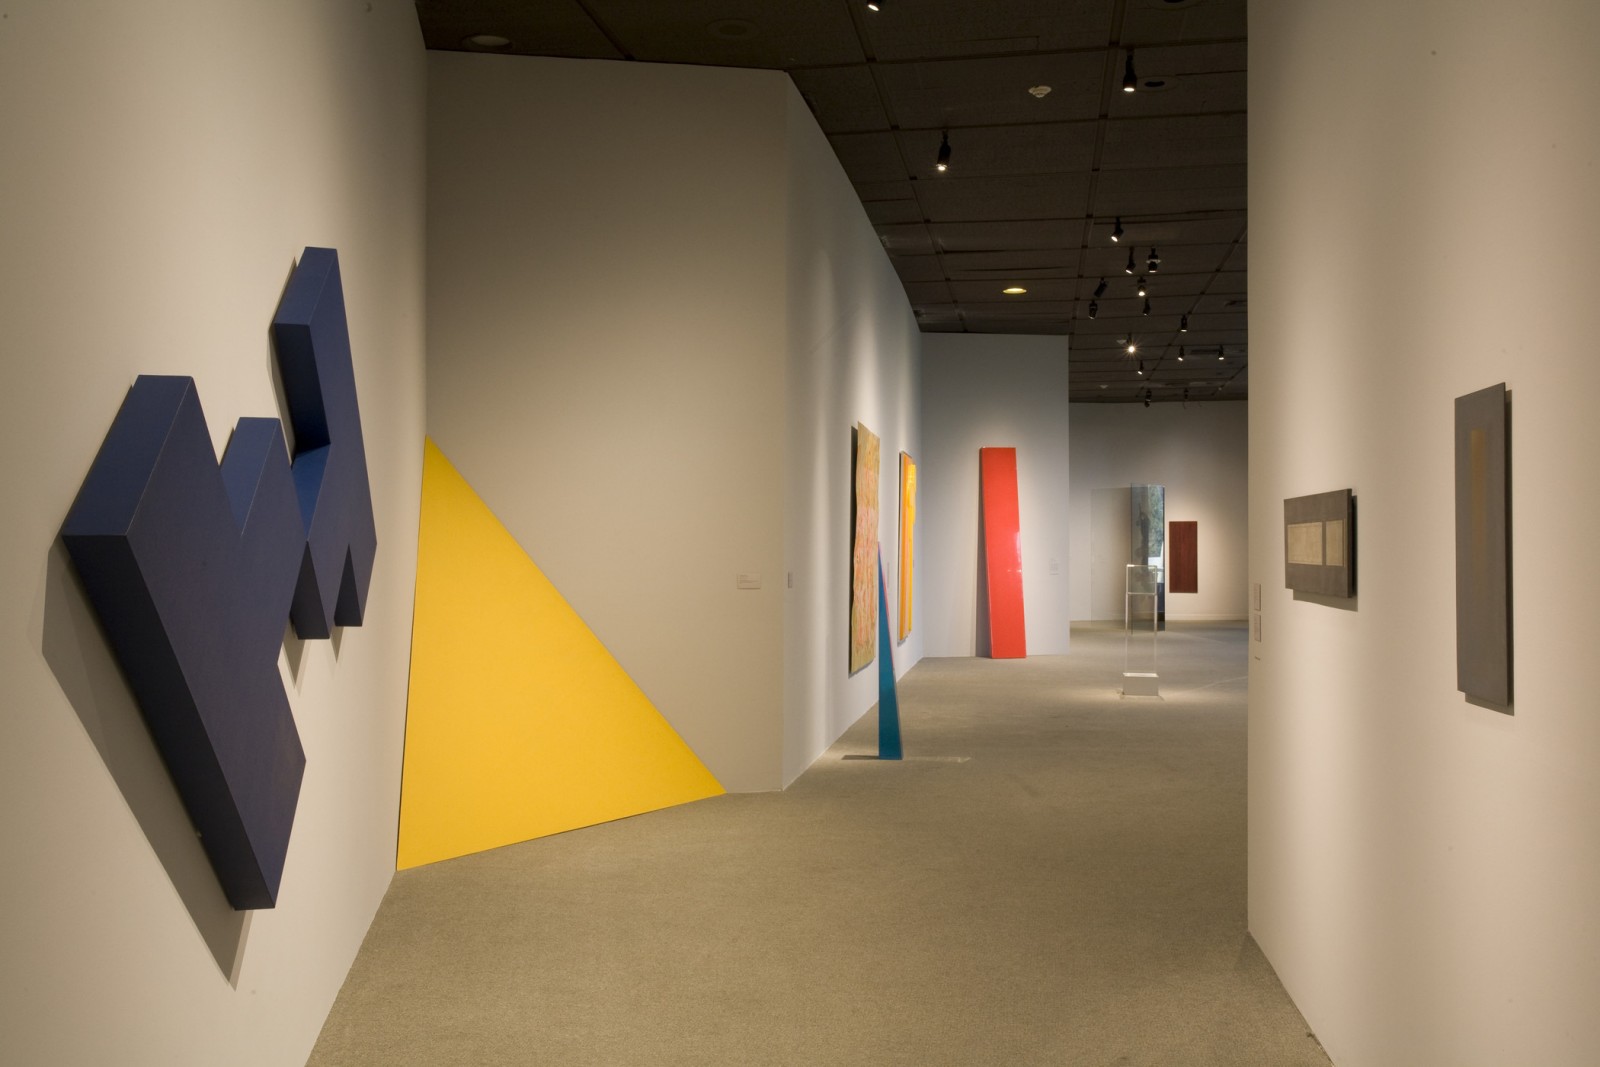 Image: Installation View of SoCal: Southern California Art of the 1960s and 70s from LACMA's Collection